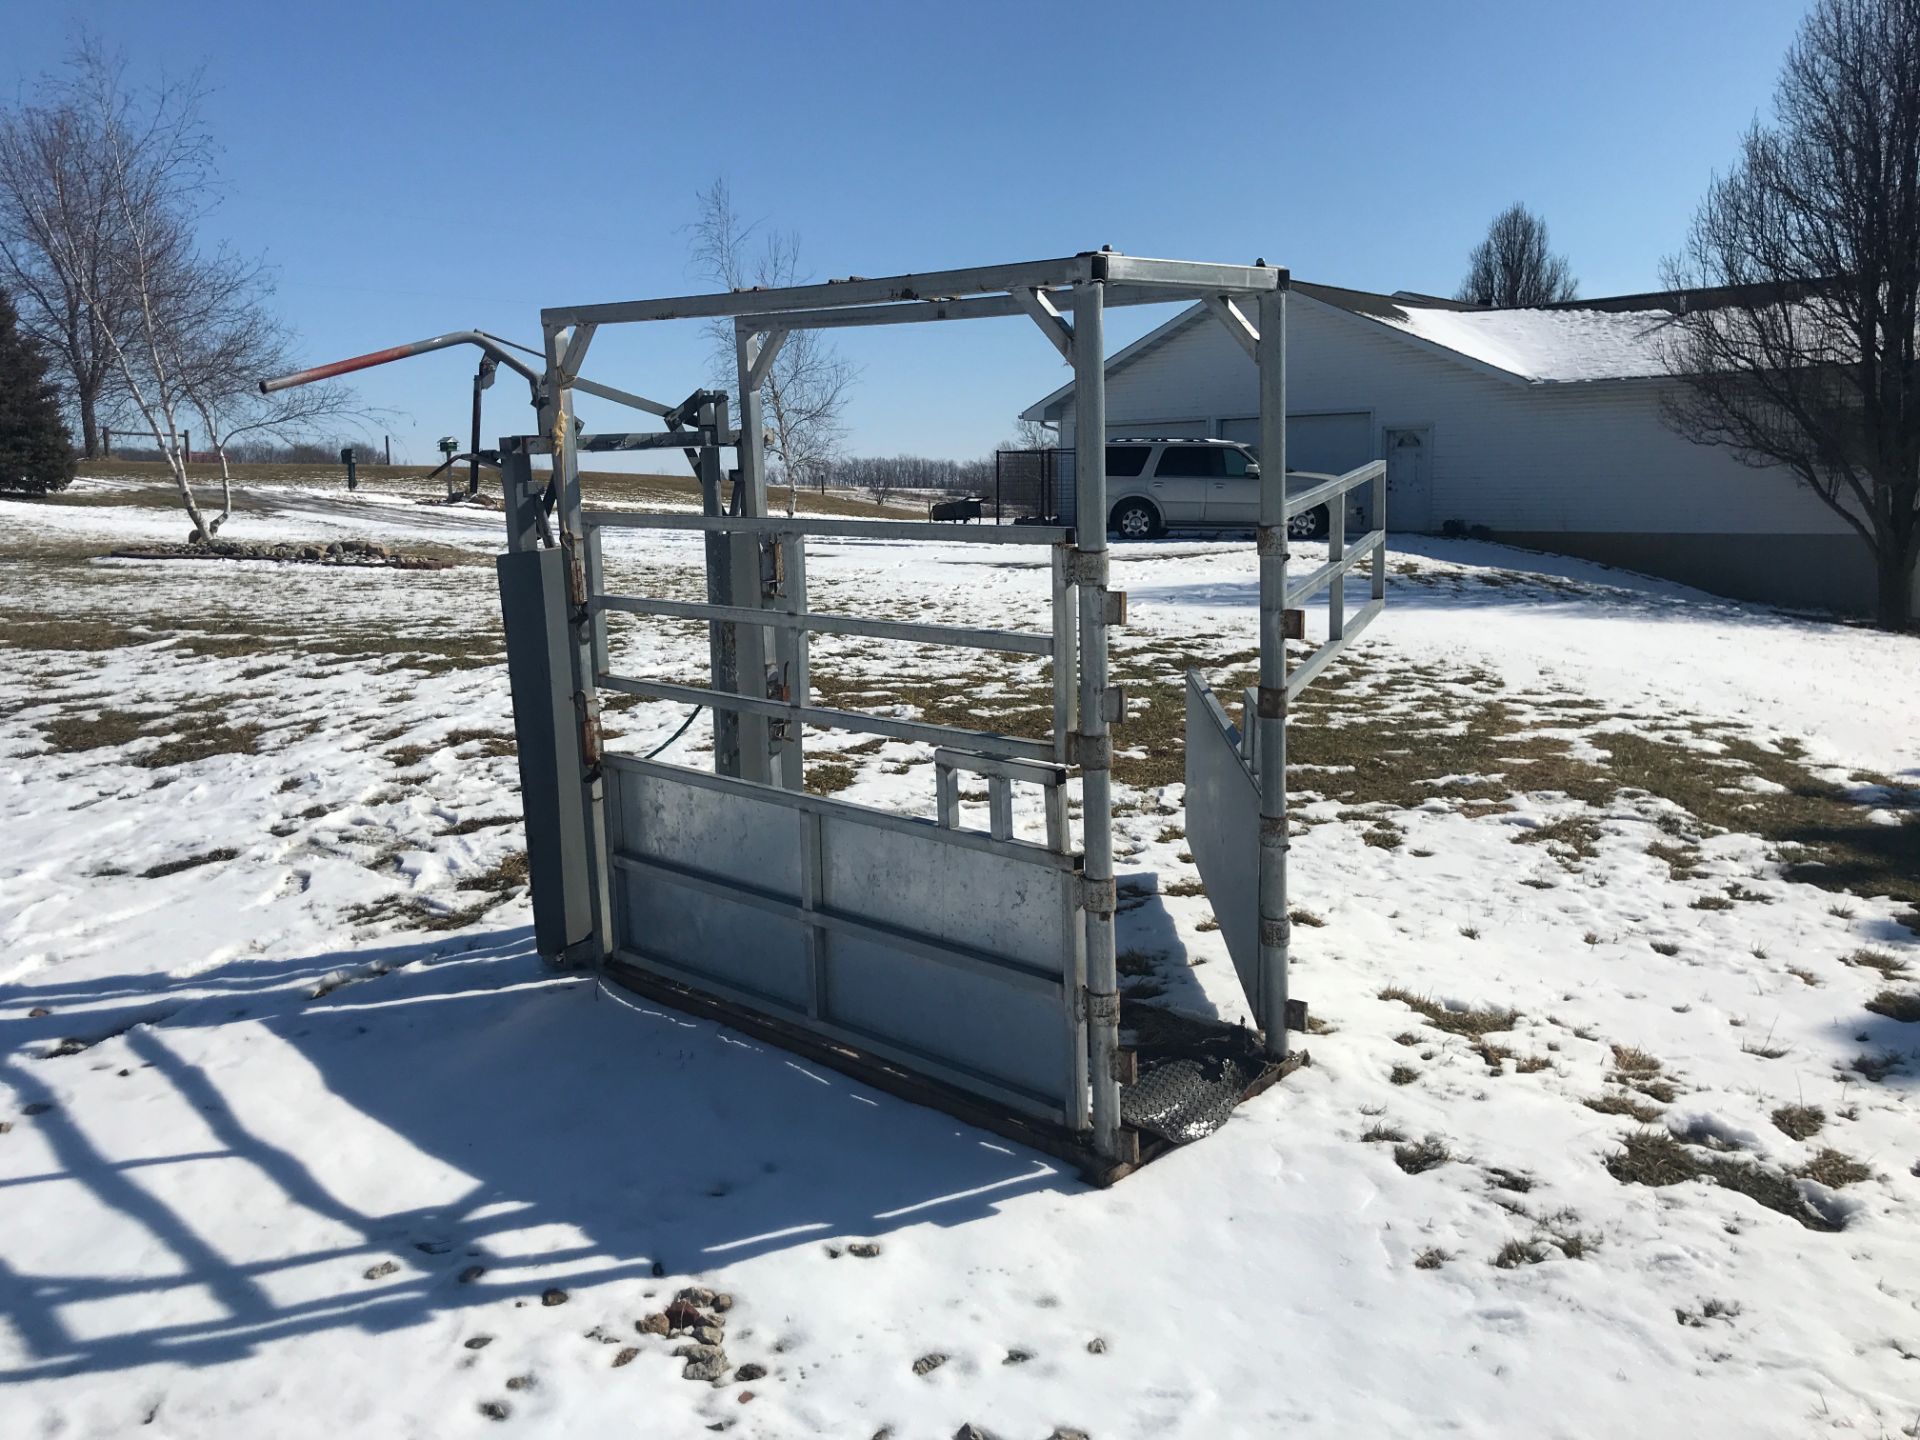 River Rode Cattle Chute, Manual Catch, Double Side Door, Wood Floor, (NICE CONDITION) - Image 2 of 4